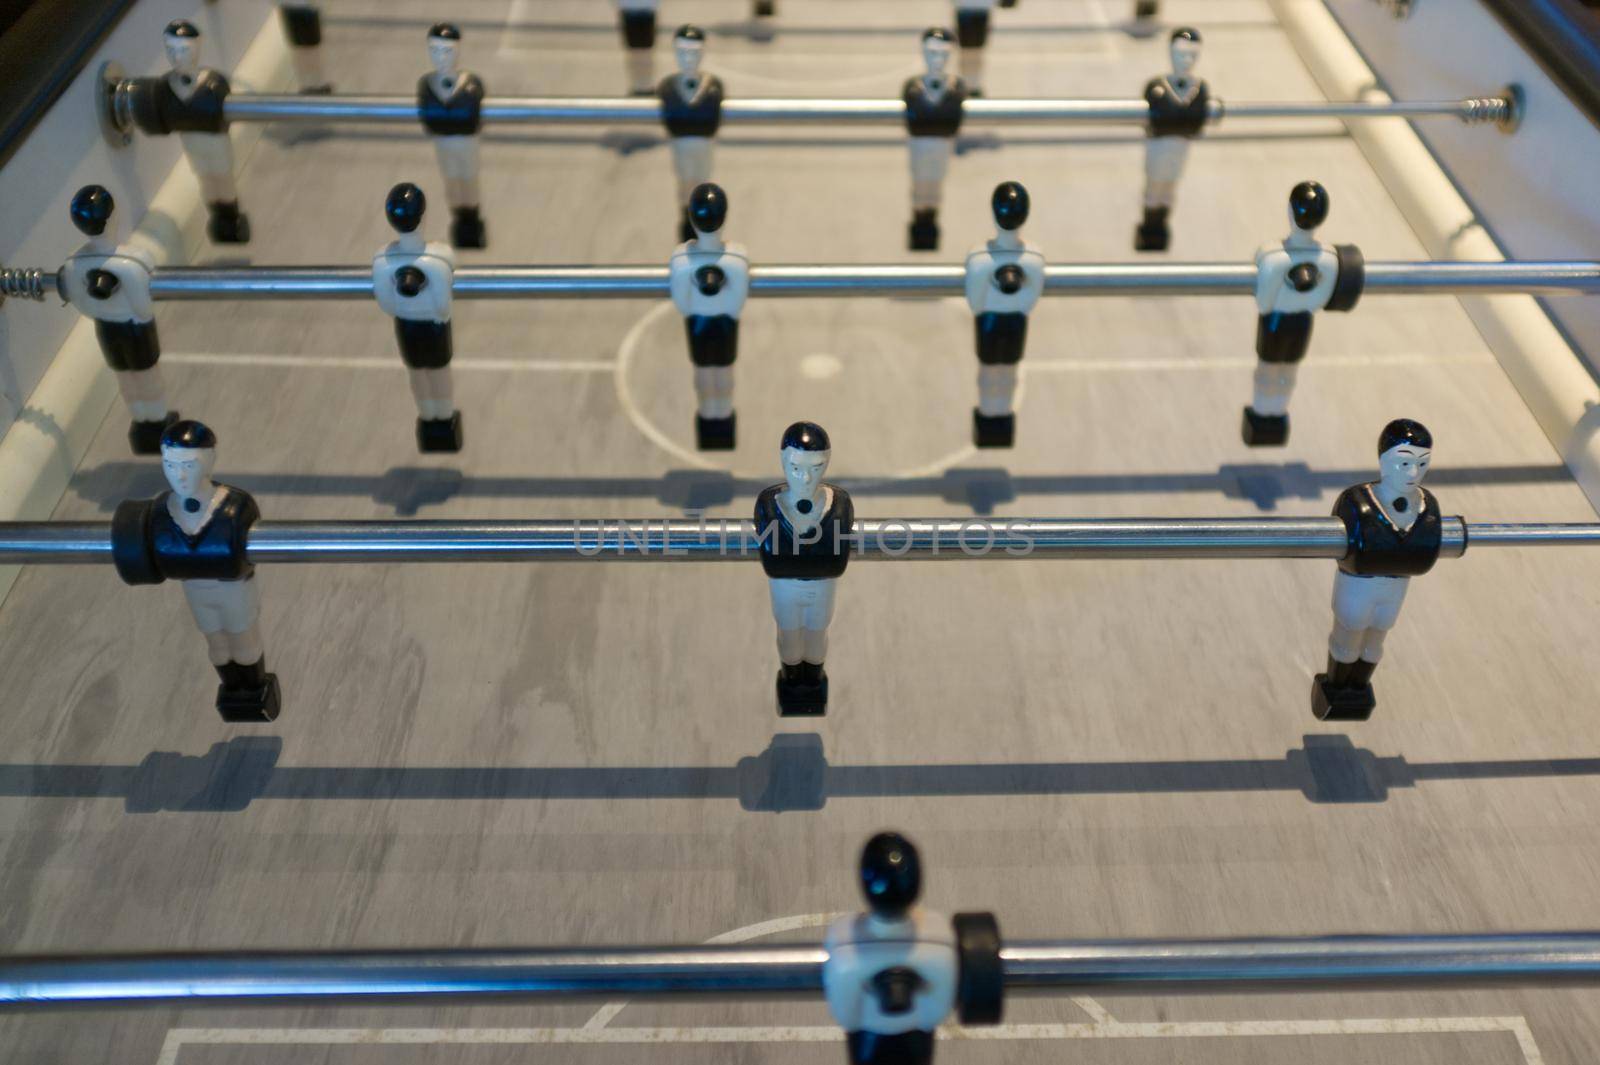 Table football for office recreation, table-top game,  Concept bussinese  , Strategic